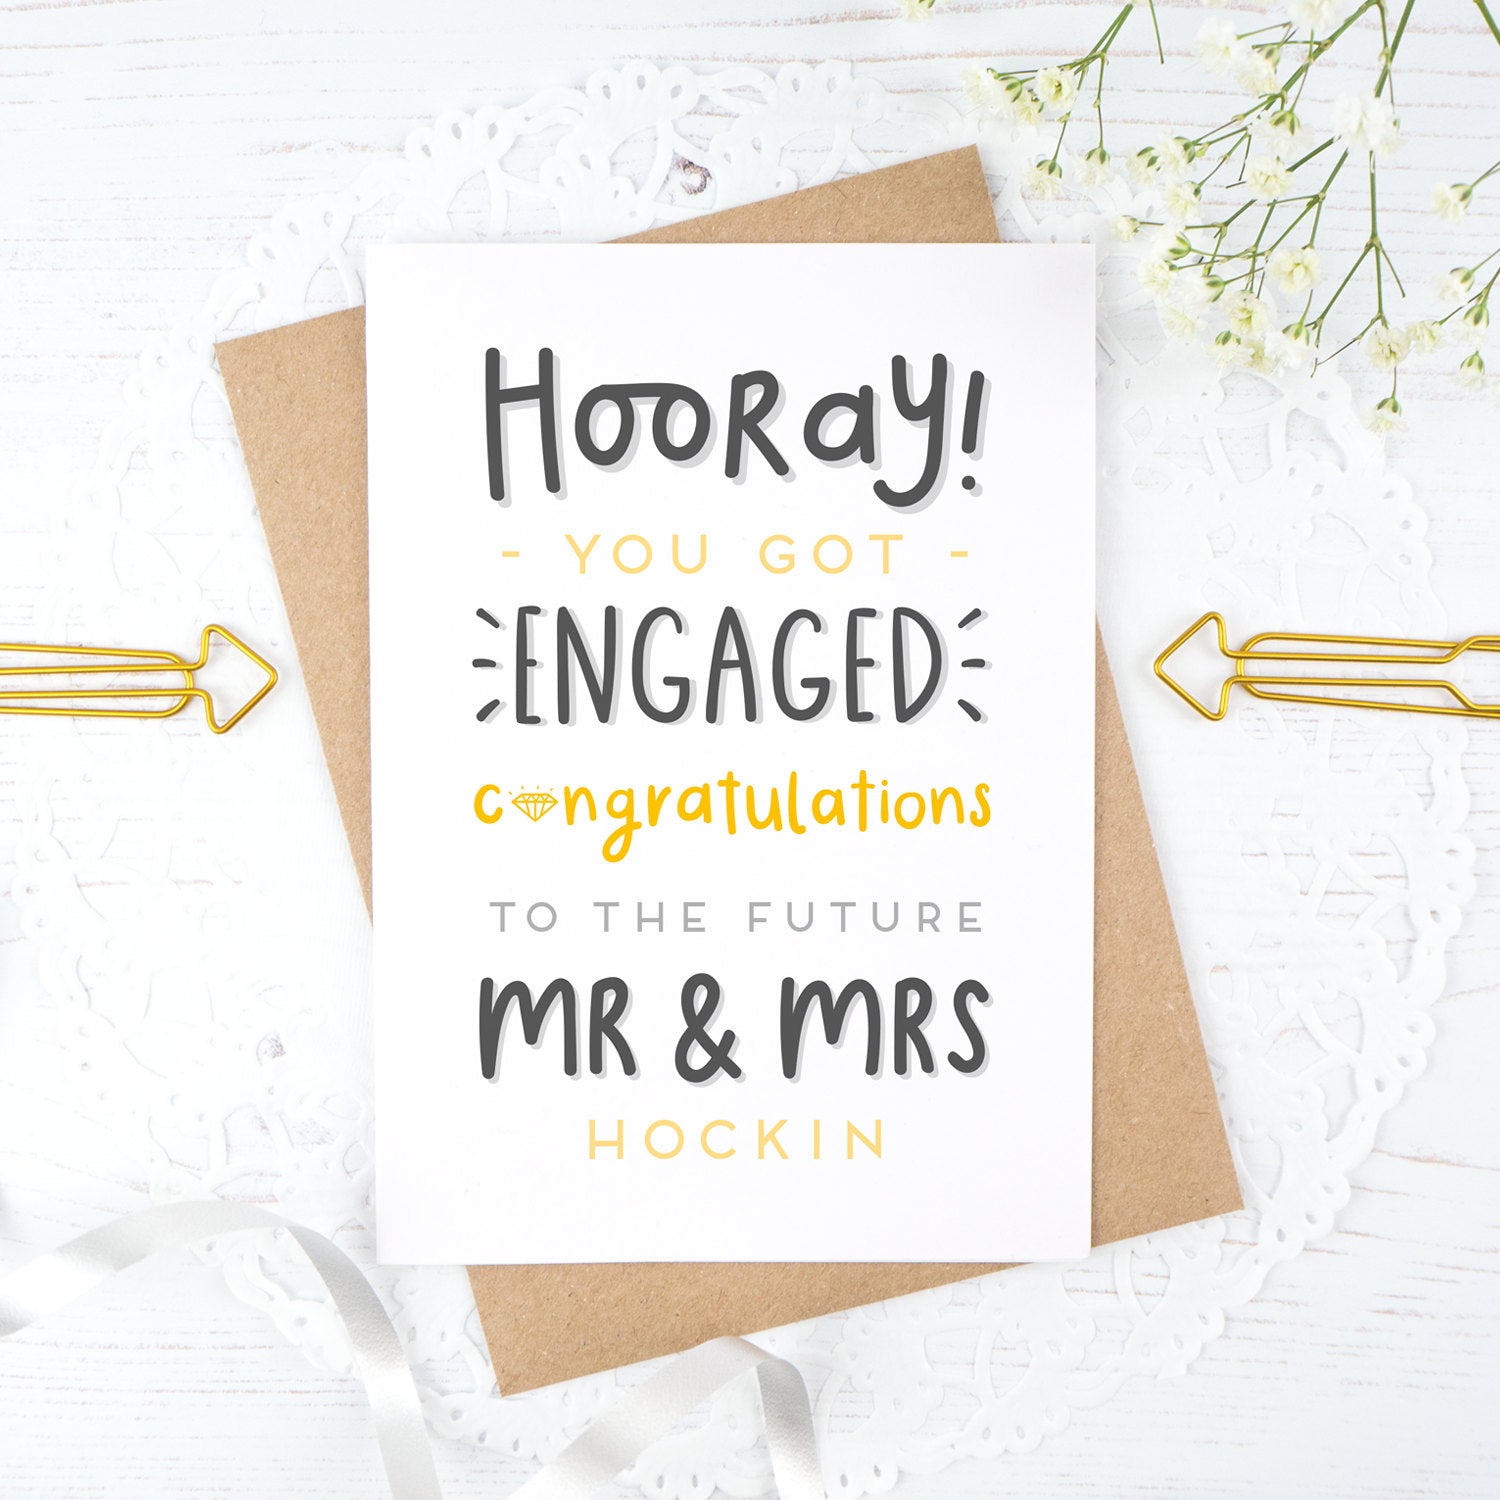 Hooray you got engaged! - Personalised Mr & Mrs engagement card in yellow